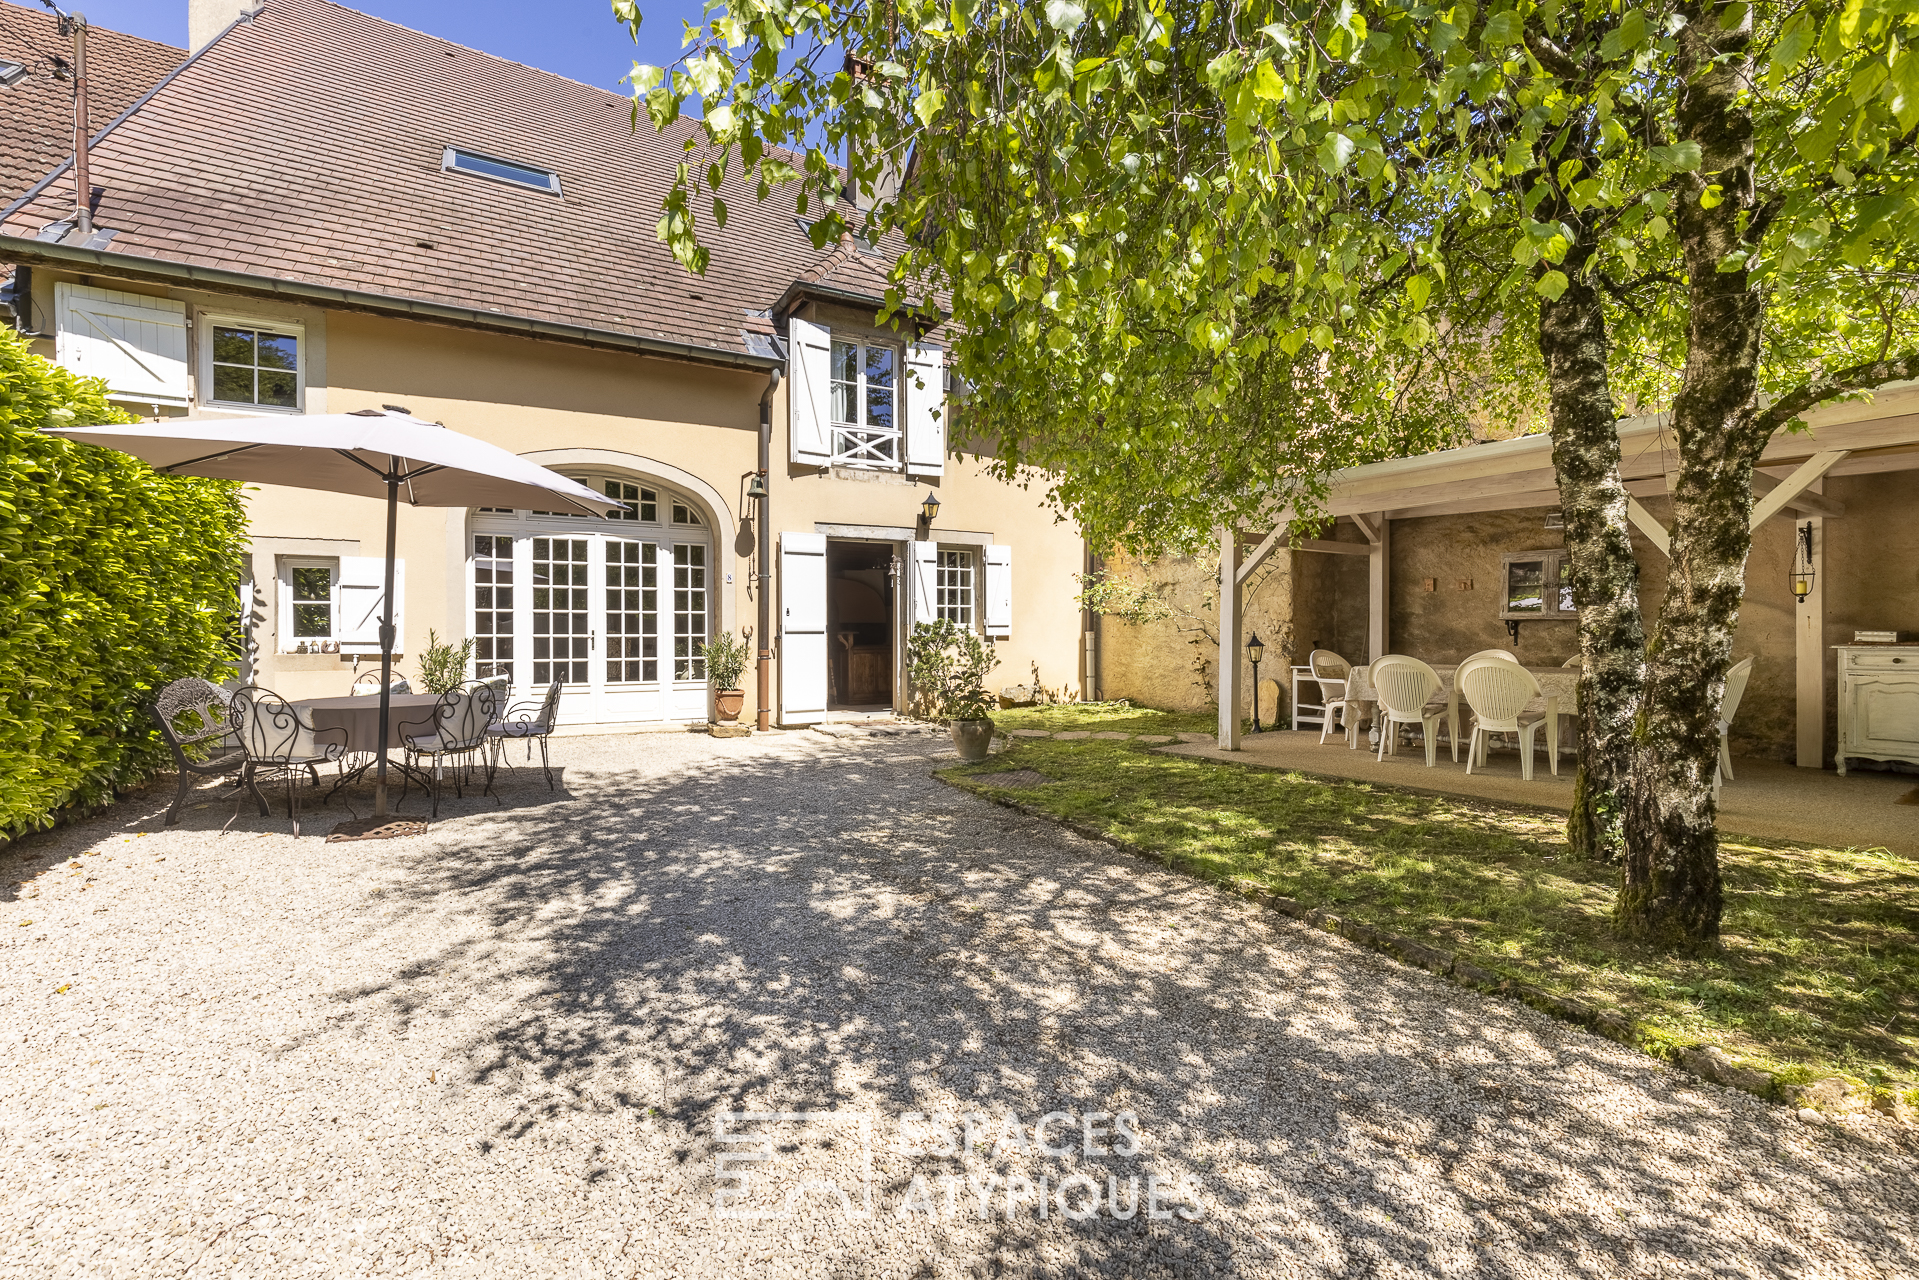 Stone house with swimming pool near Château-Chalon